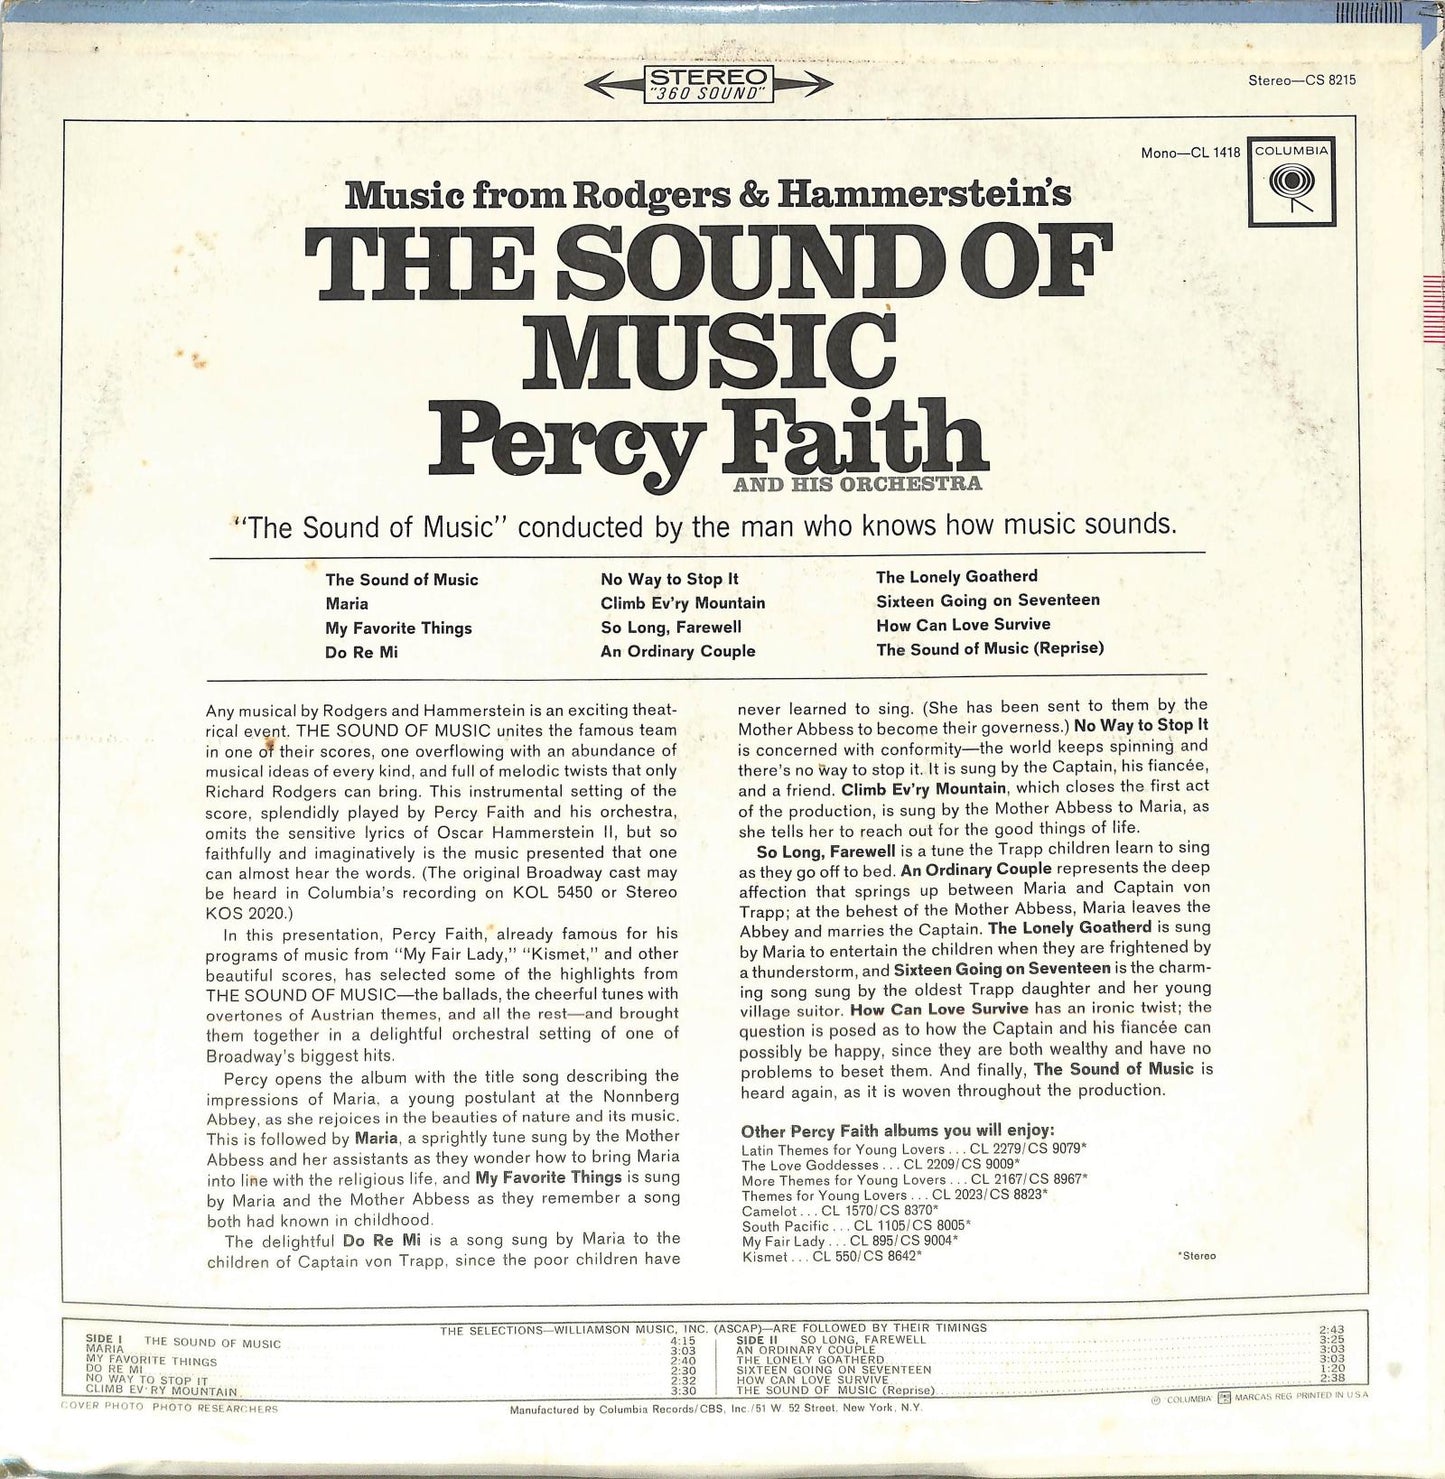 PERCY FAITH & HIS ORCHESTRA - Music From Rodgers & Hammerstein's The Sound Of Music